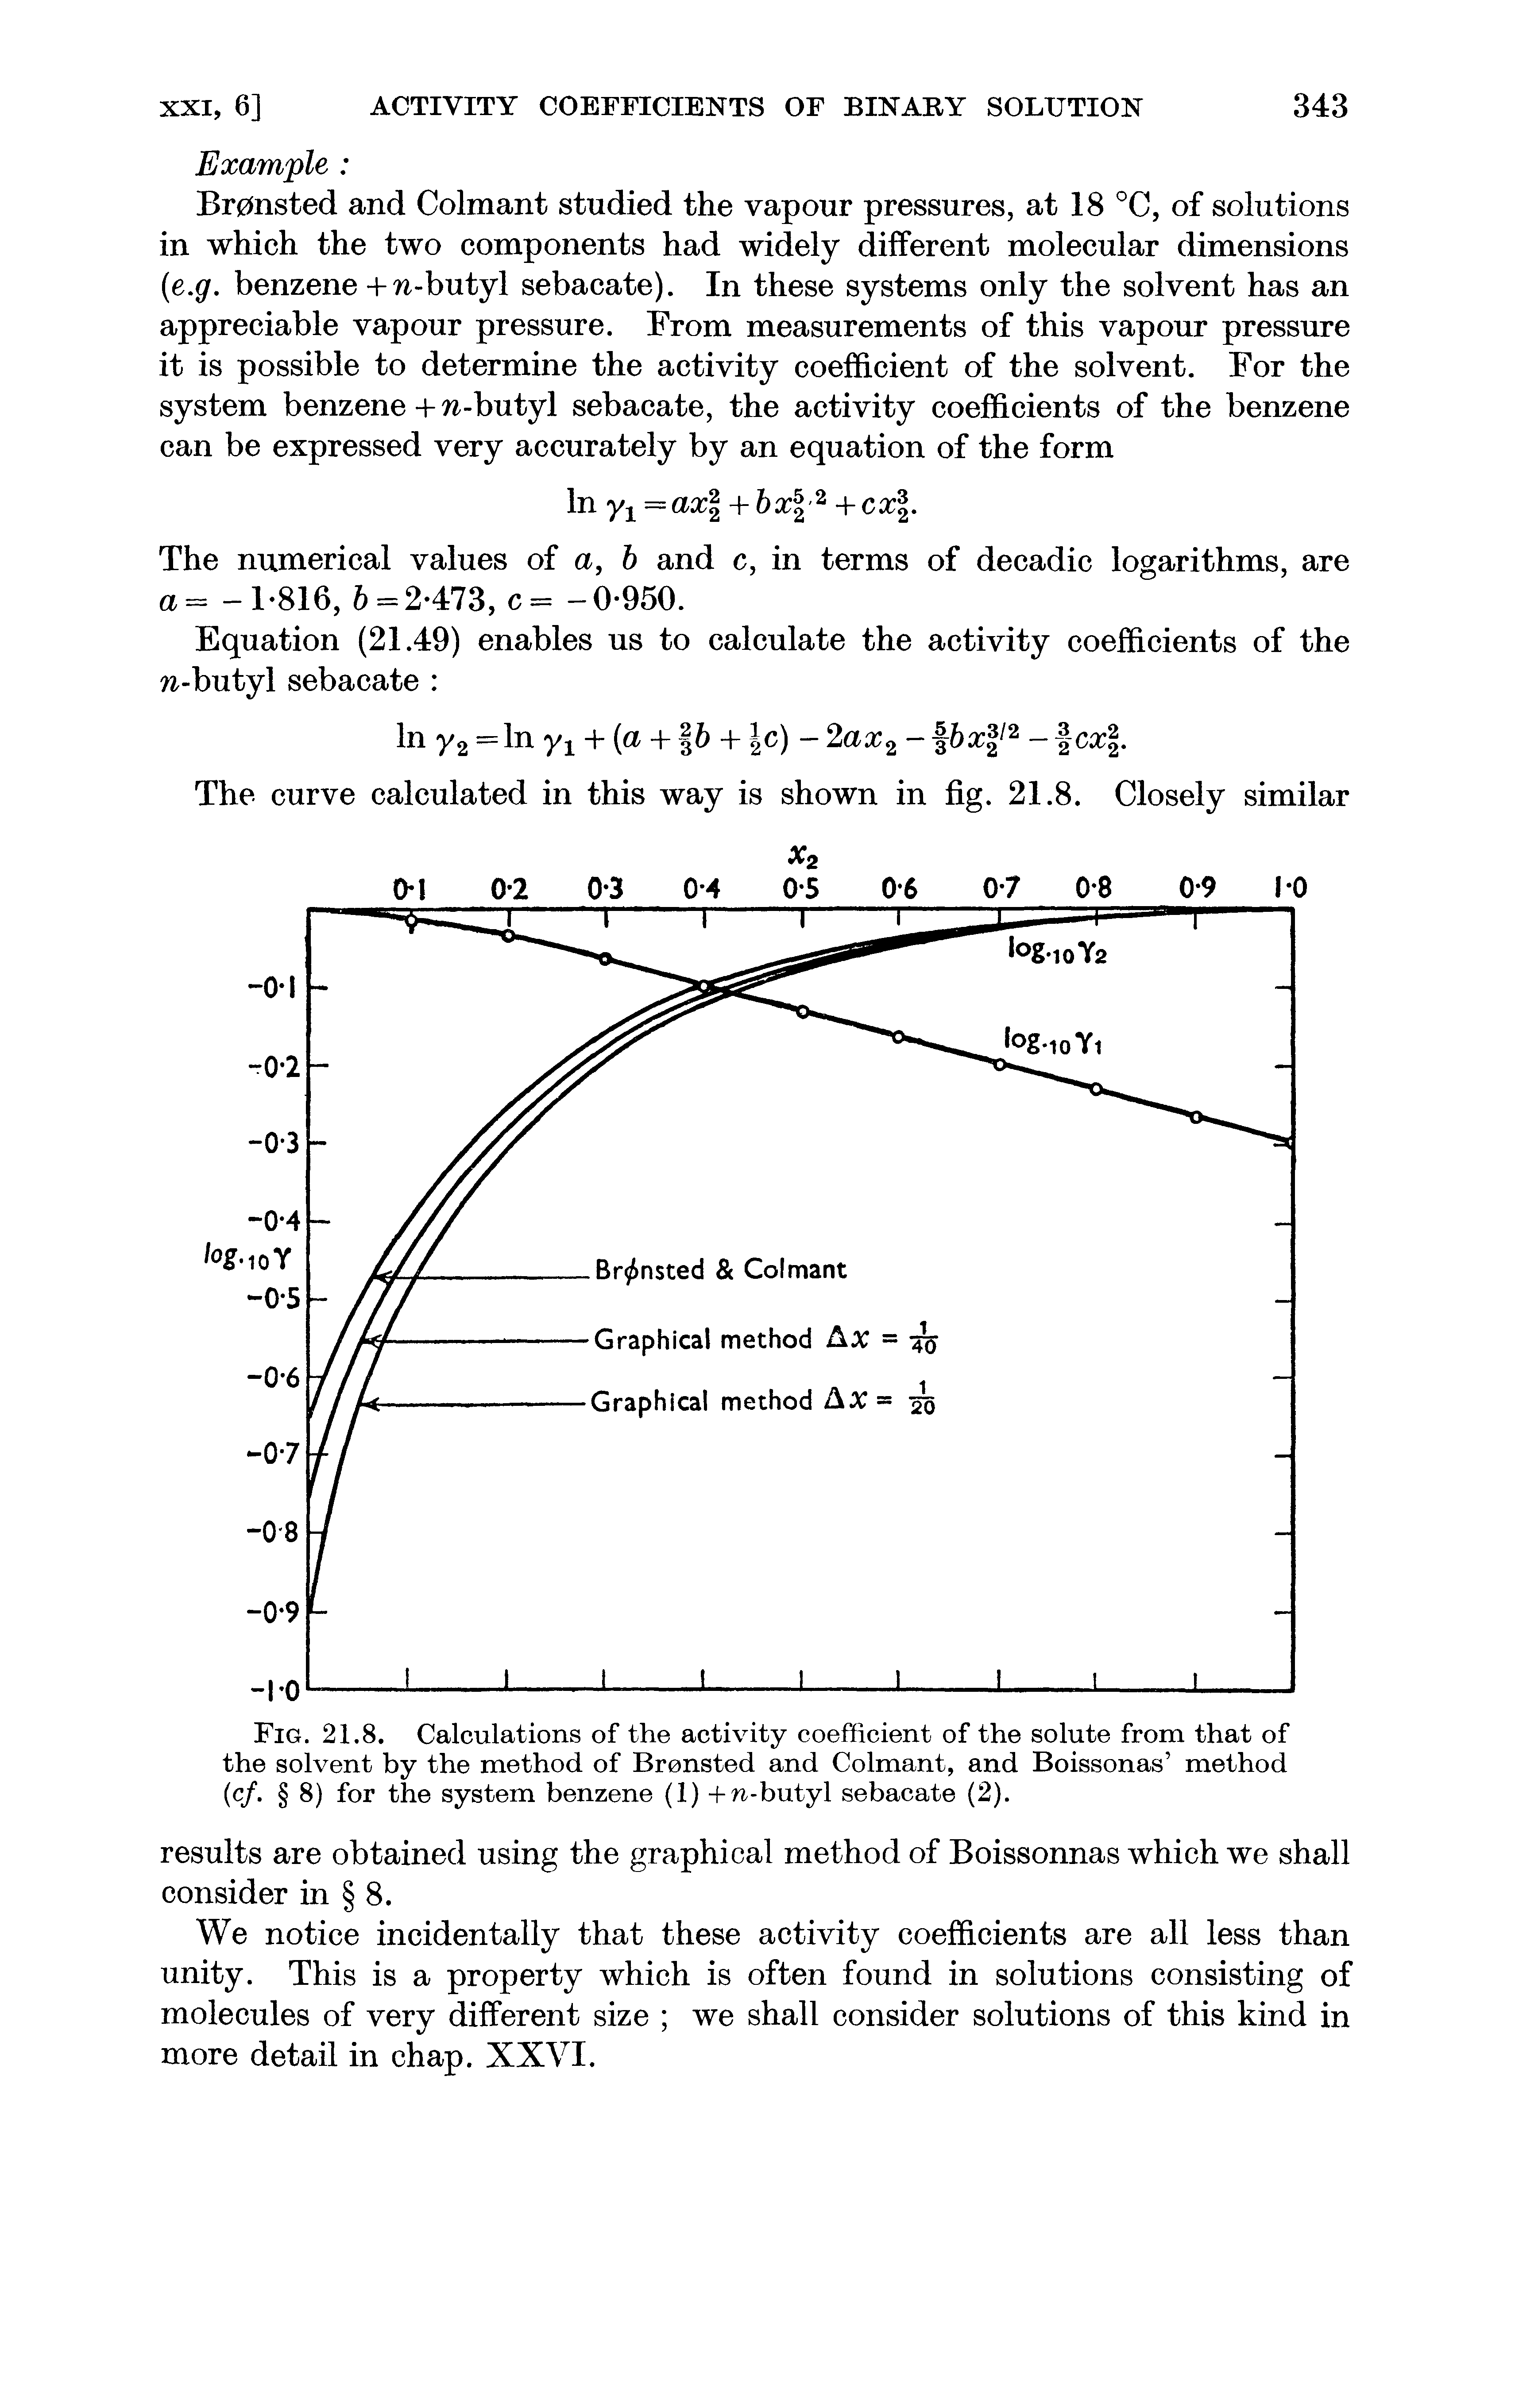 Fig. 21.8. Calculations of the activity coefficient of the solute from that of the solvent by the method of Bronsted and Colmant, and Boissonas method (c/. 8) for the system benzene (1) +n-butyl sebacate (2).